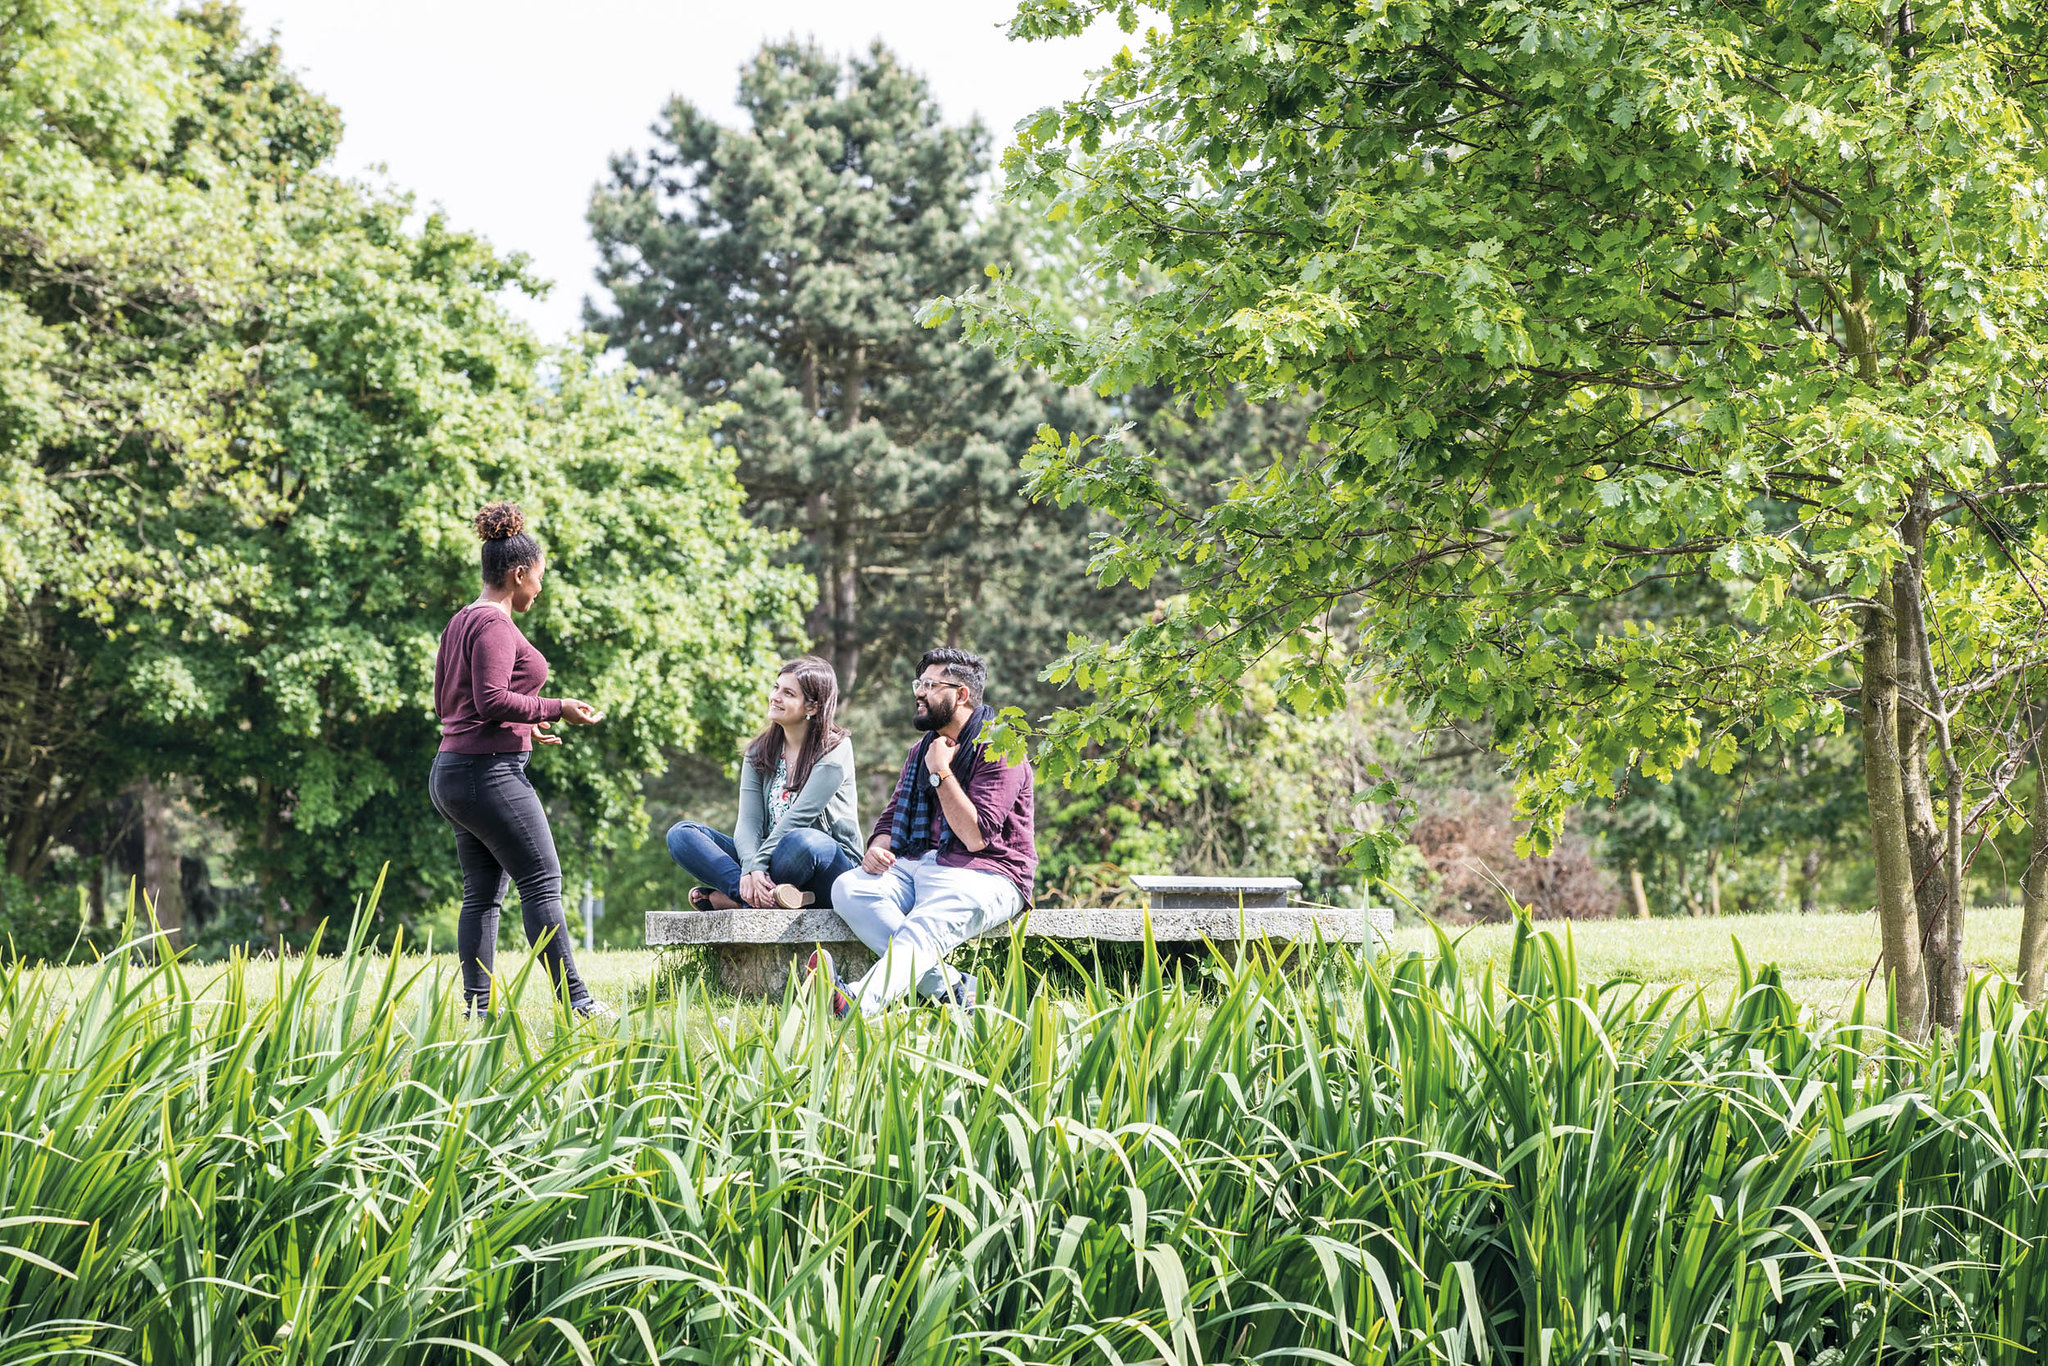 Students chat near the Keynes duck pond